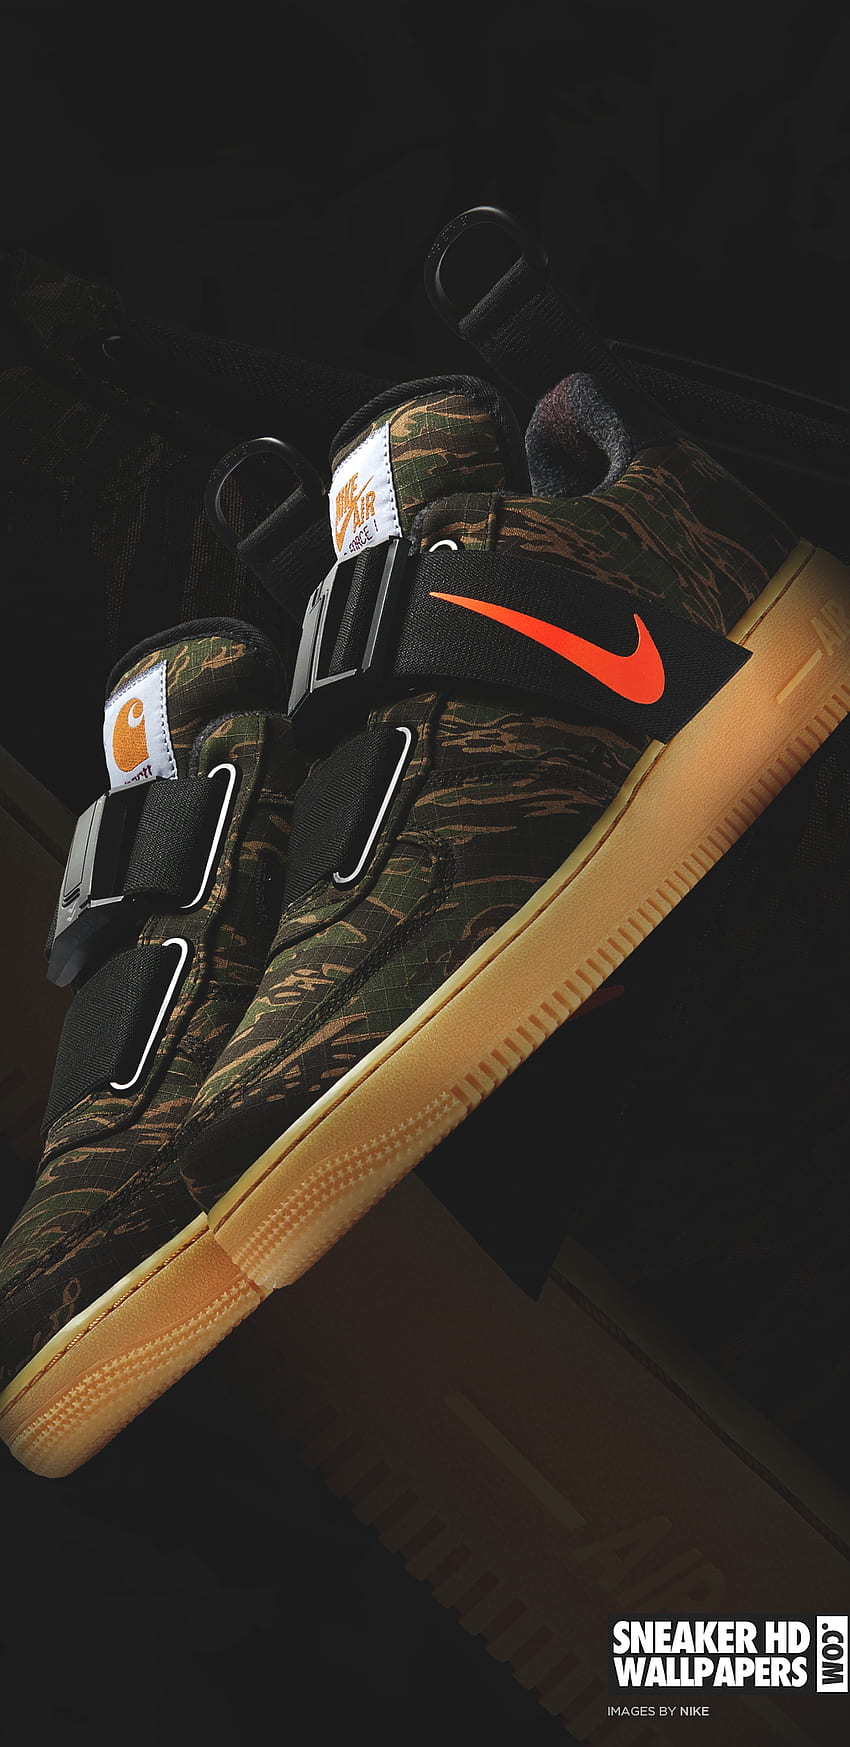 Your favorite sneakers in , Retina, Mobile and resolutions! Nike Air Force 1 Archives - Your favorite sneakers in , Retina, Mobile and resolutions!, Nike AF1 HD phone wallpaper